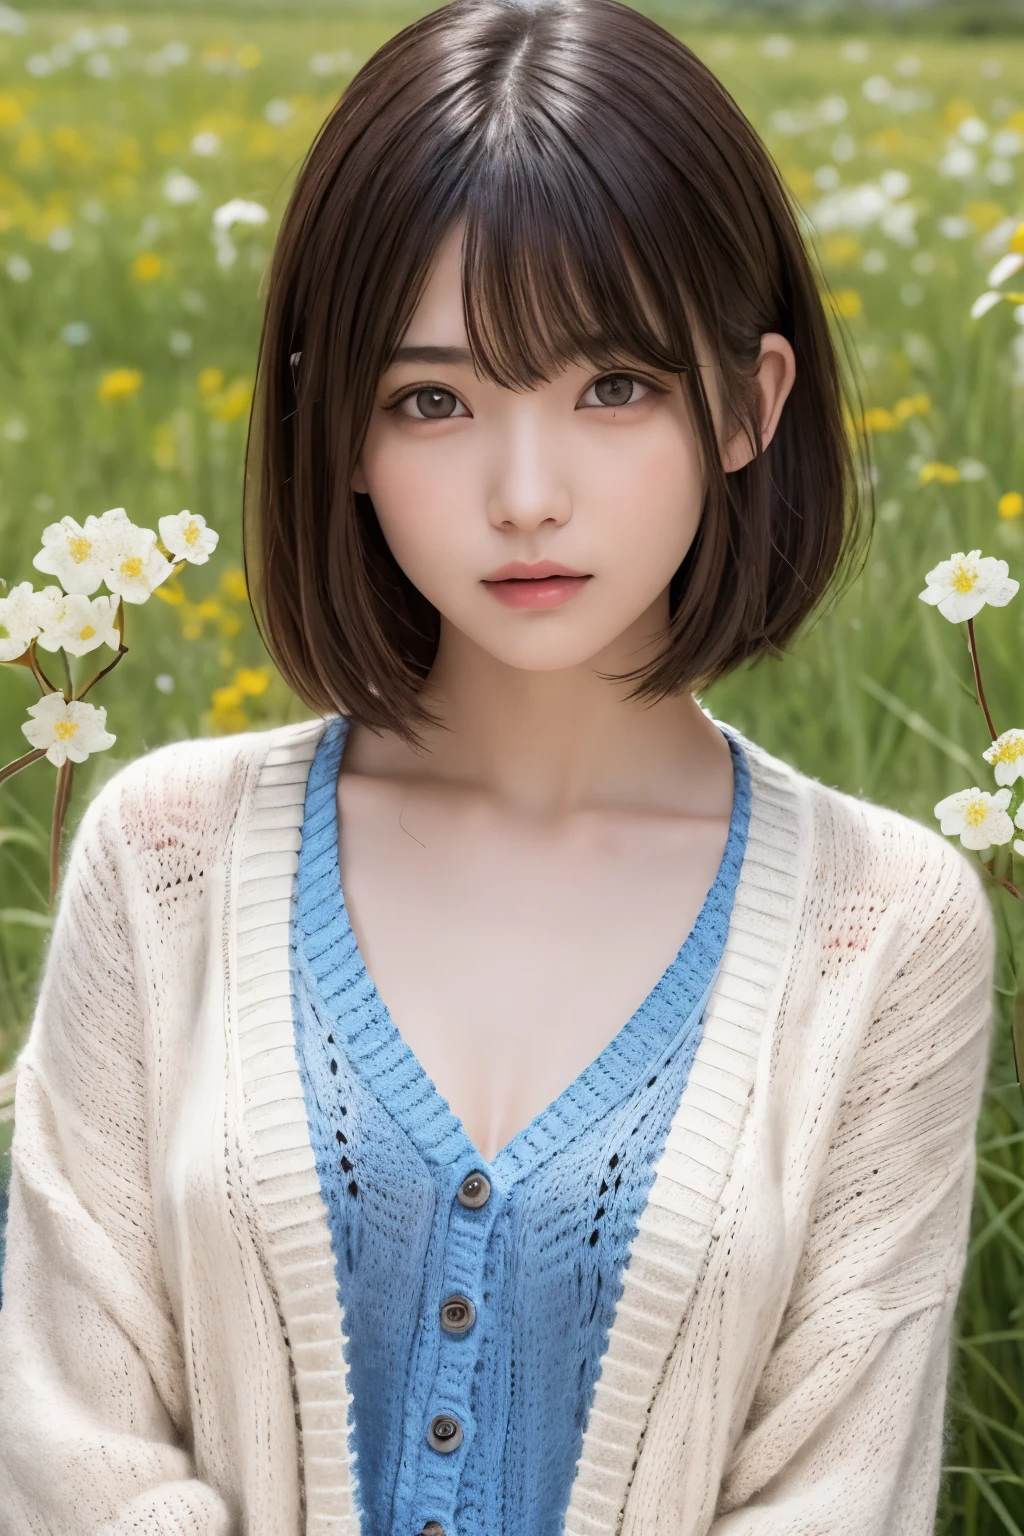 masterpiece、highest quality、One girl、(beautiful girl、Delicate girl:1.3)、(16 years old:1.3)、very fine eyes、(symmetrical eyes:1.3)、(rape blossom meadow:1.2)、(adult fashion、knit cardigan:1.3)、small breasts、brown eyes、bangs parting、brown hair、girl、(Eye and face details:1.0)、(Close up to face、face zoom、face focus:0.1)